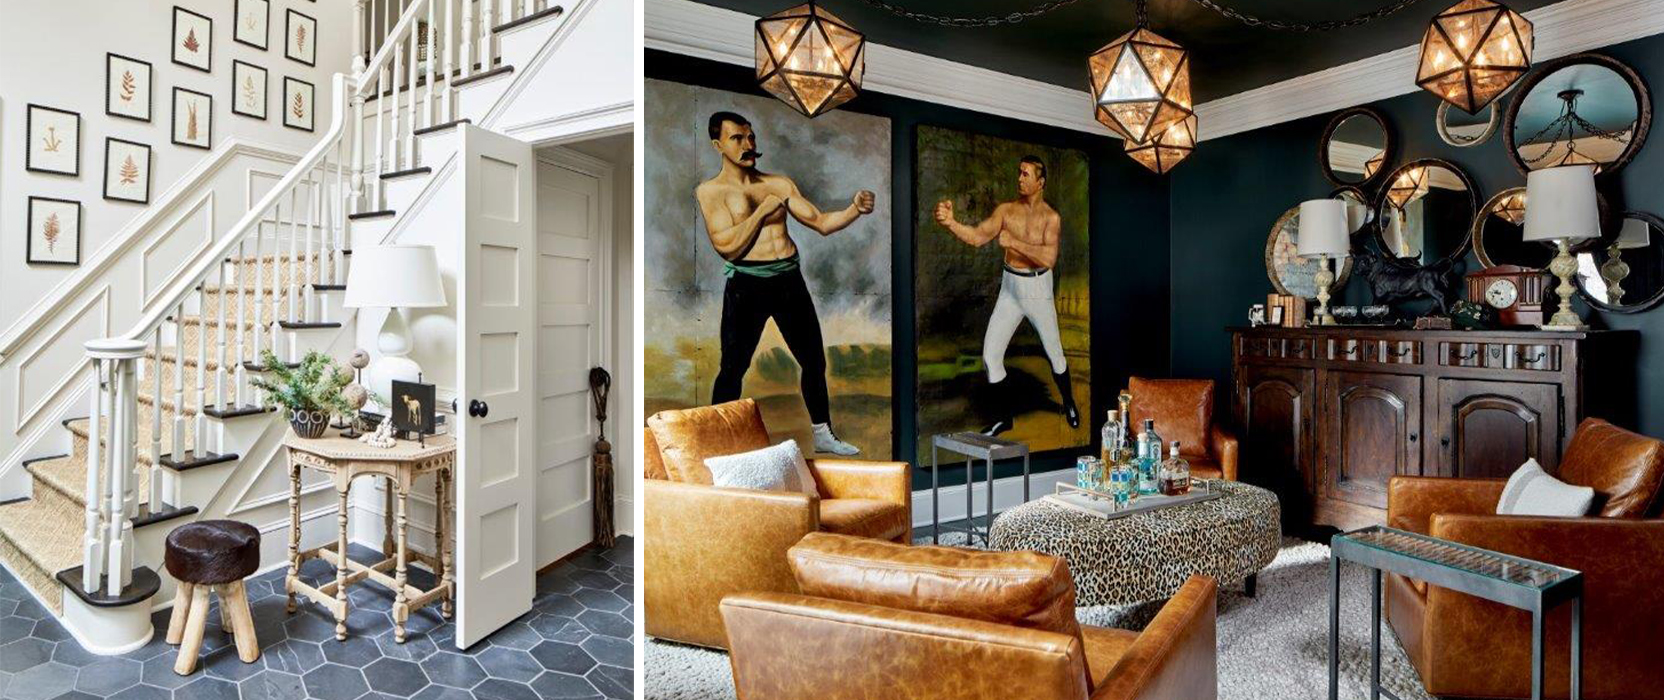 Left image: Stairwell in entryway painted white with black treads, framed art on the wall and hexagonal tiled flooring. Right image: Sitting area in residence with four leather armchairs arranged around an animal-print circular ottoman topped with a tray of liquor bottles and oversize paintings of boxers on dark painted walls.